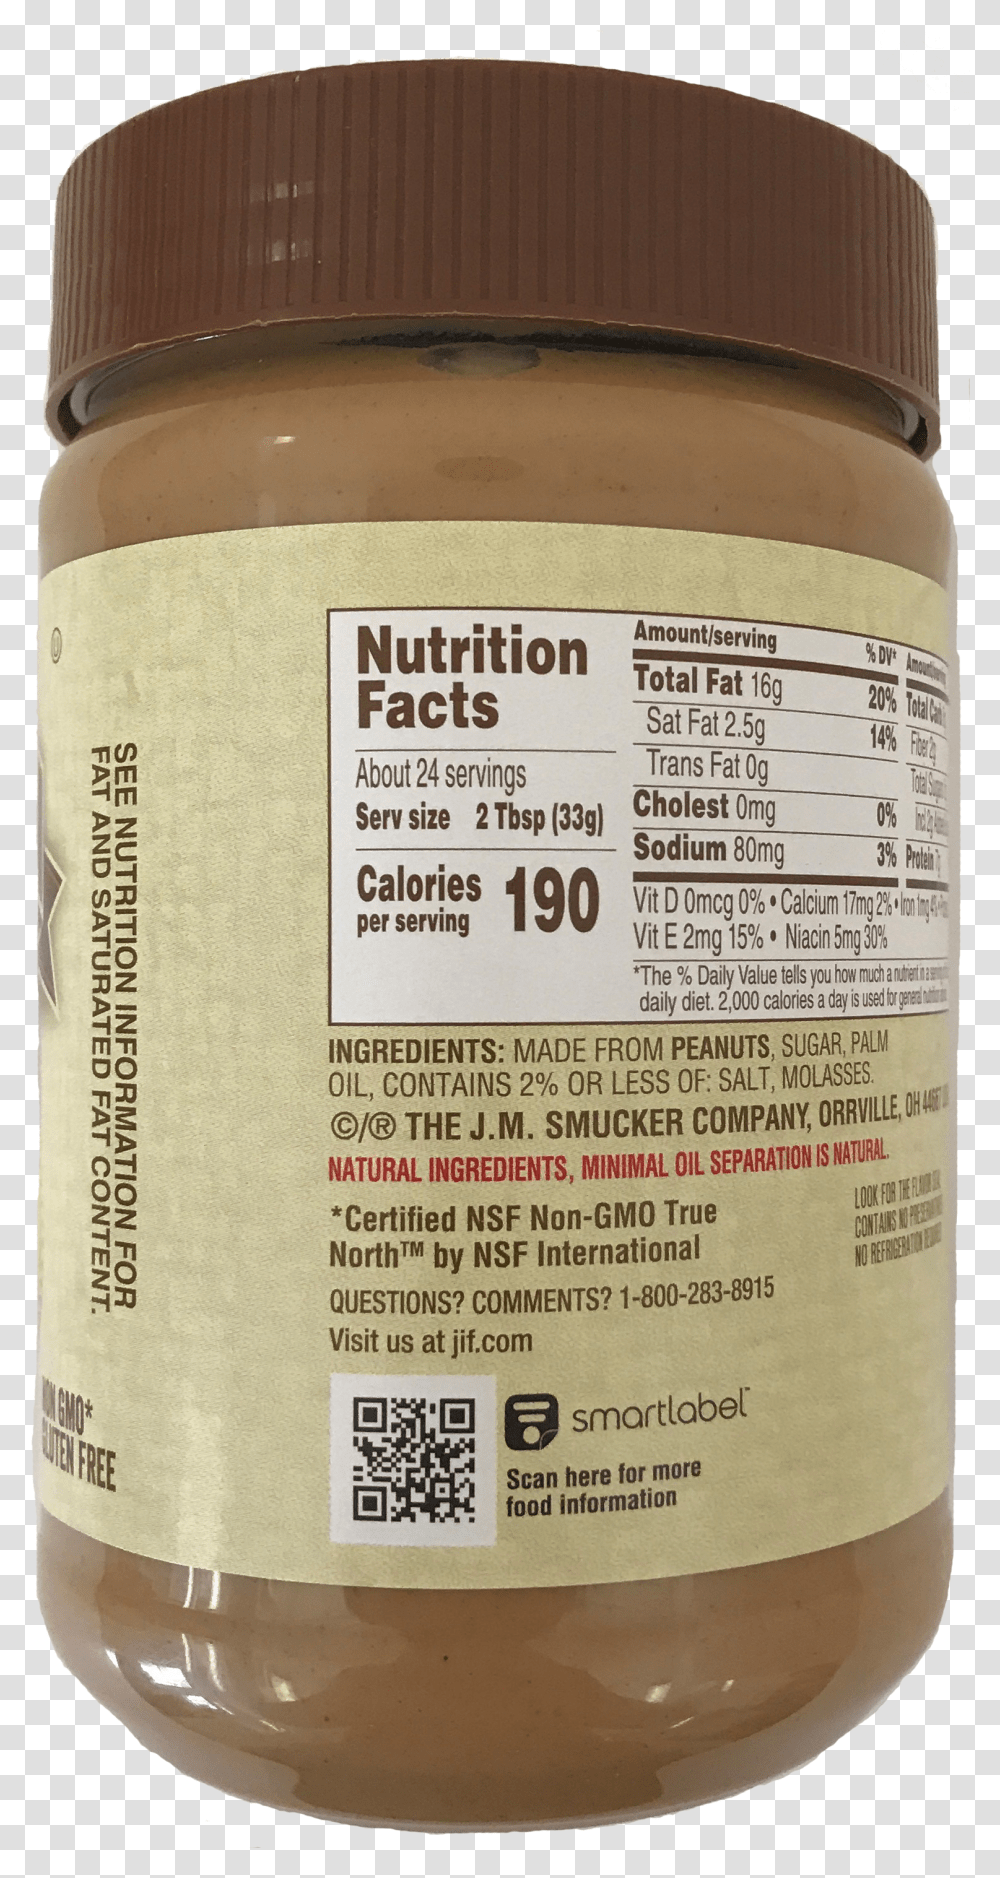 Smucker Company Jif Natural Creamy Peanut Butter Back Almond Butter Transparent Png